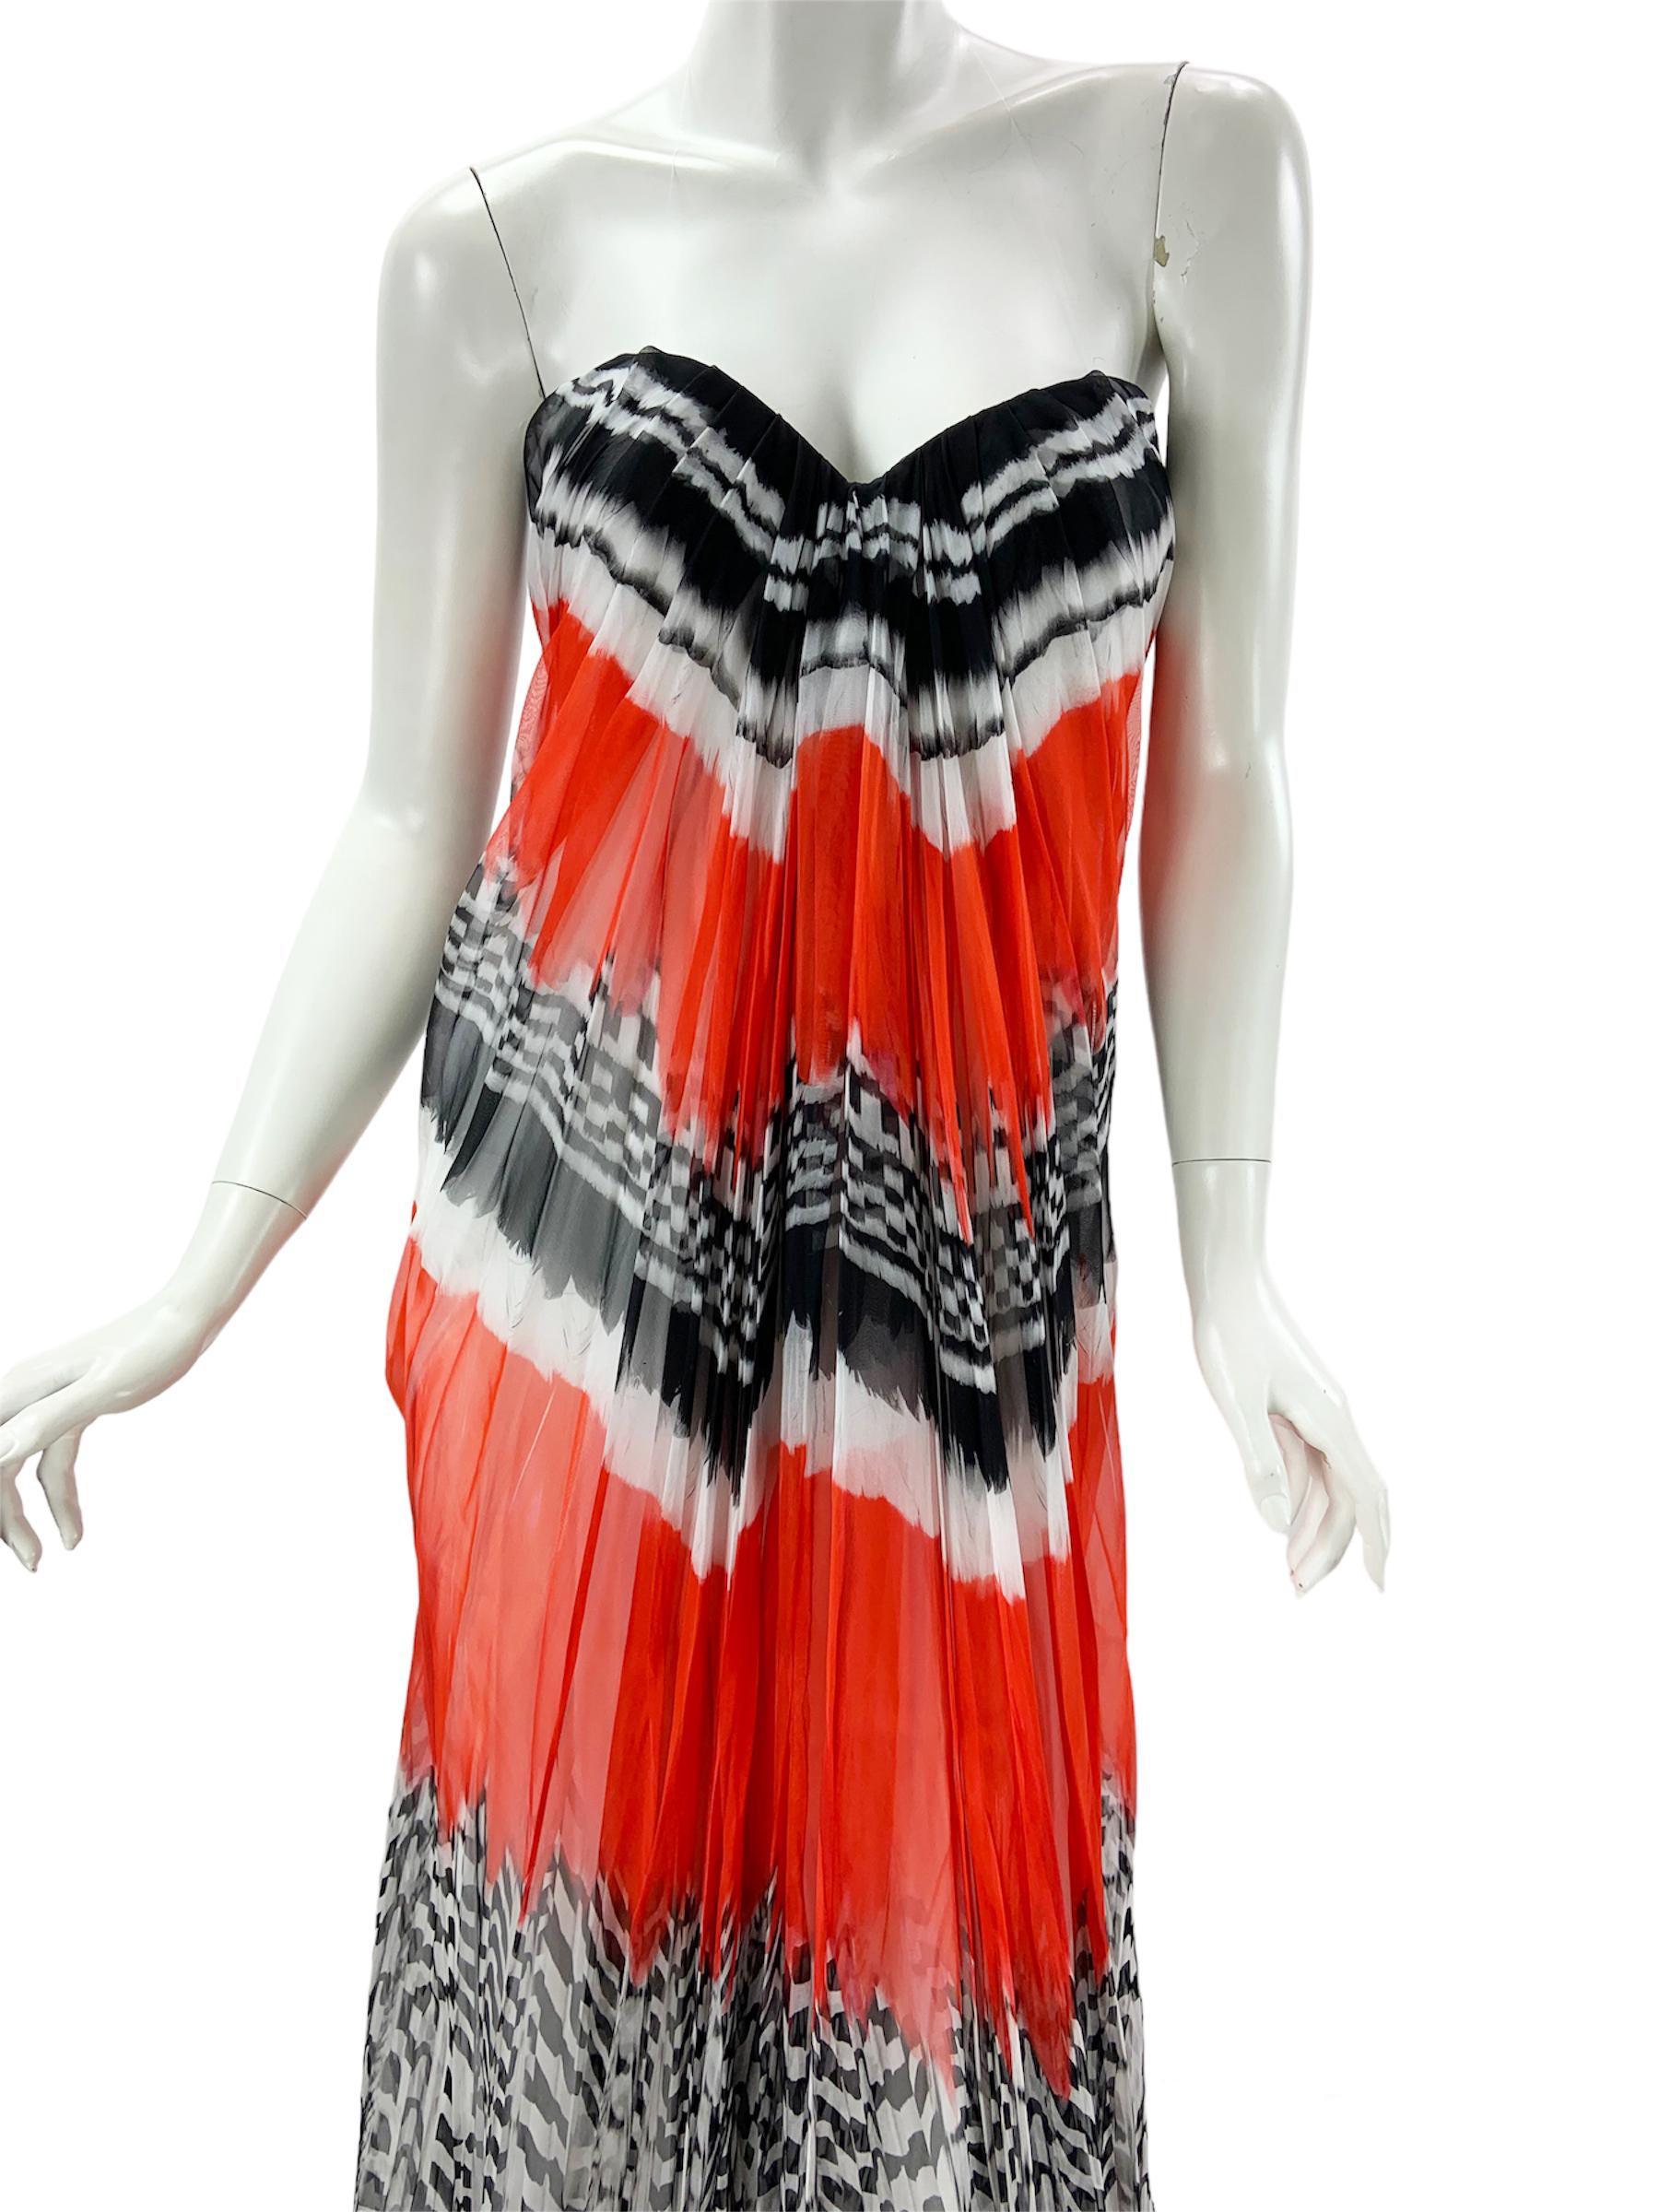 NWT Alexander McQueen S/S 2014 Silk Feather Print Bustier Dress Gown It 46 US 10 For Sale 2